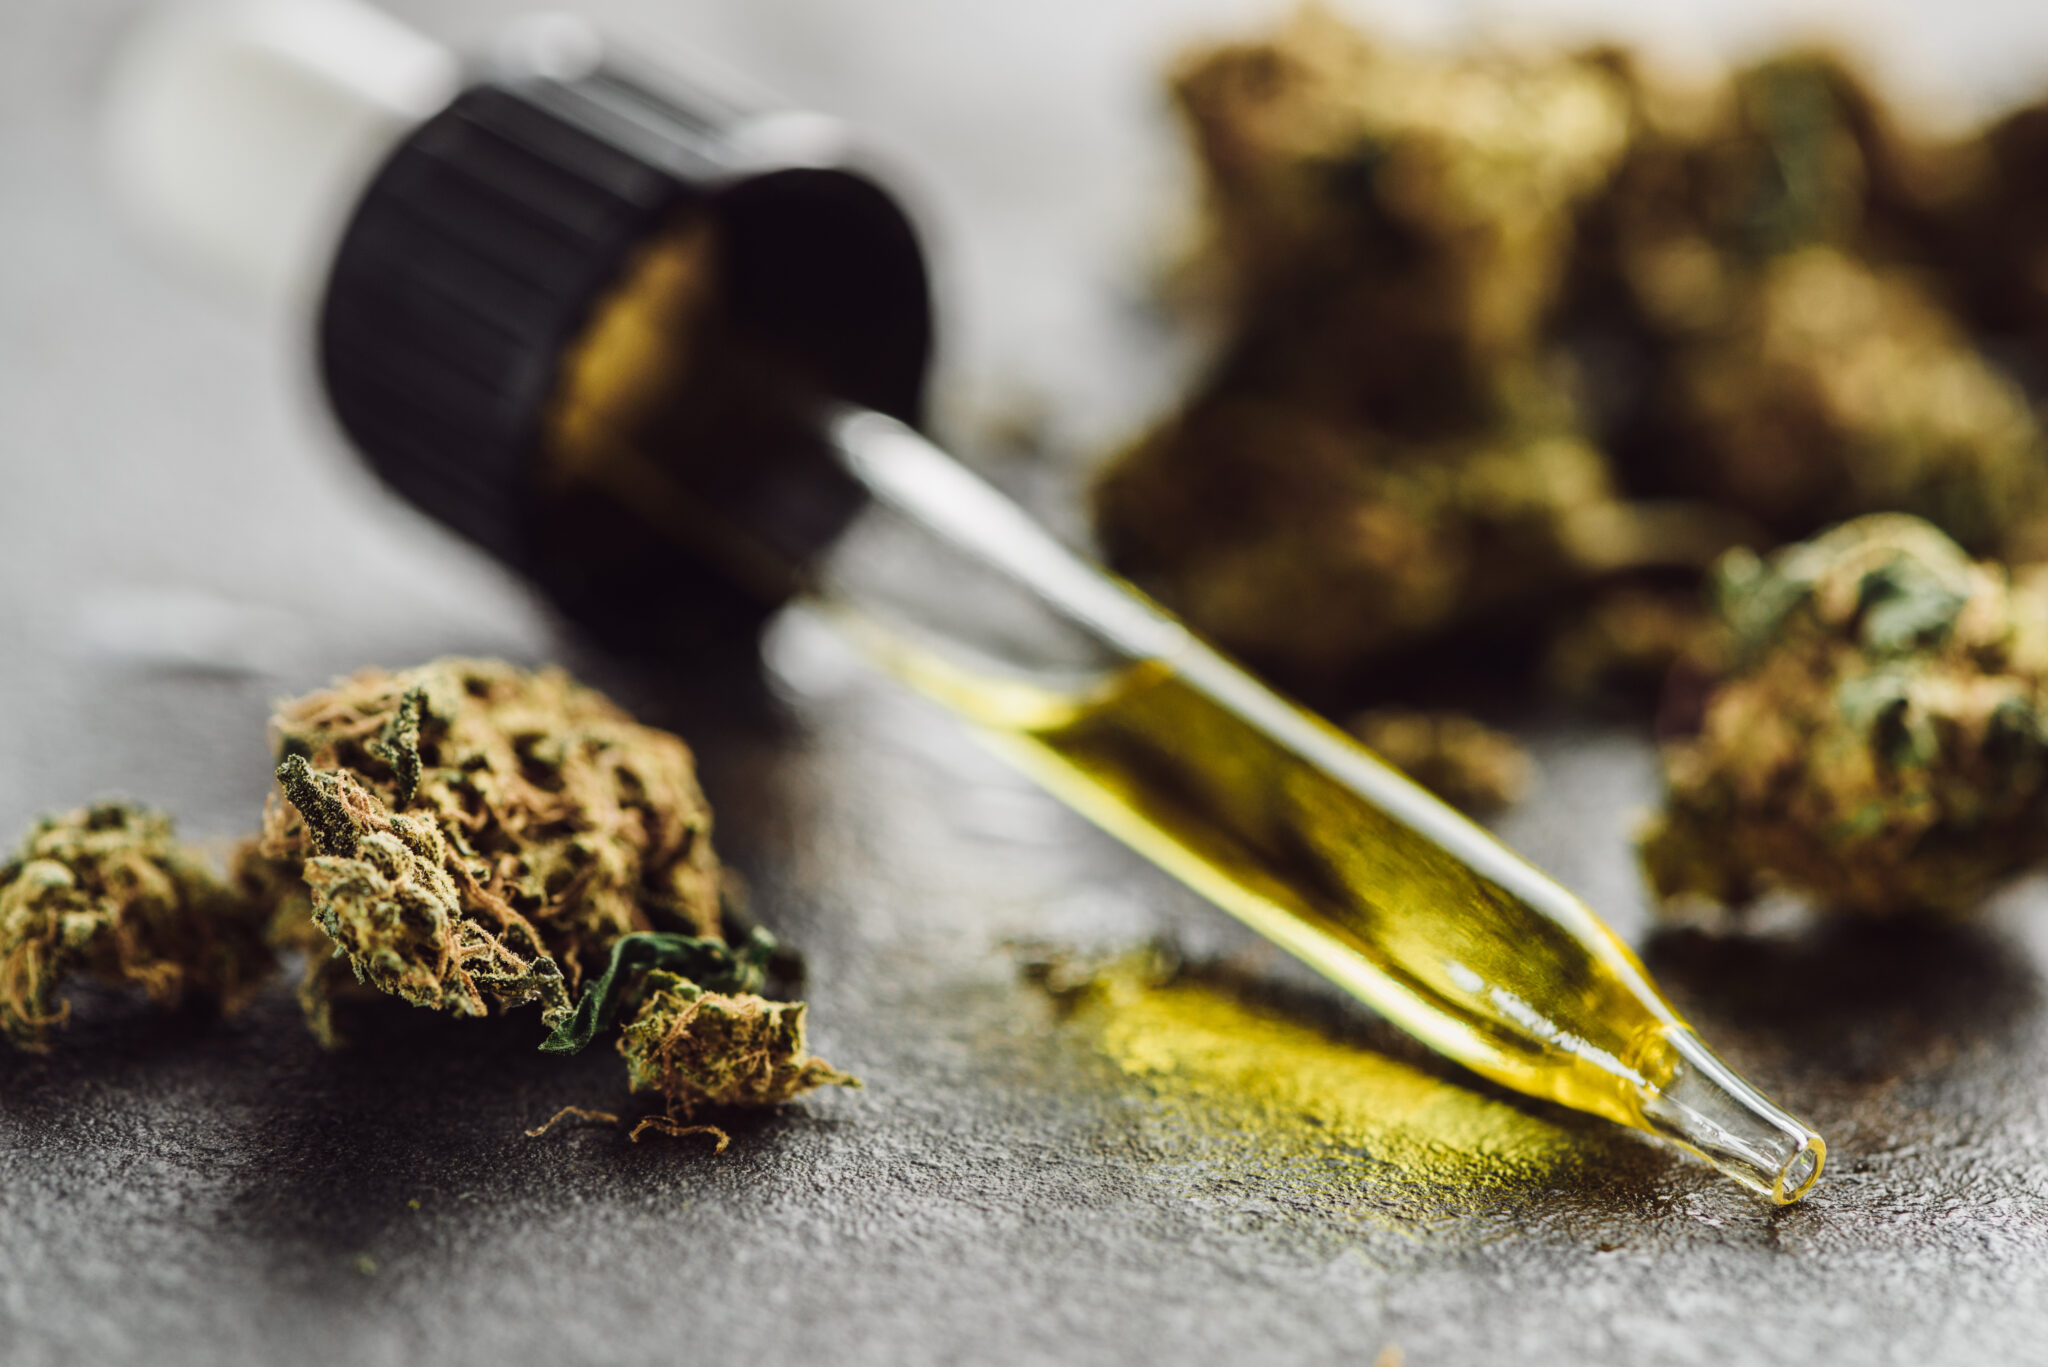 CBD and cannabis products: the law in Europe